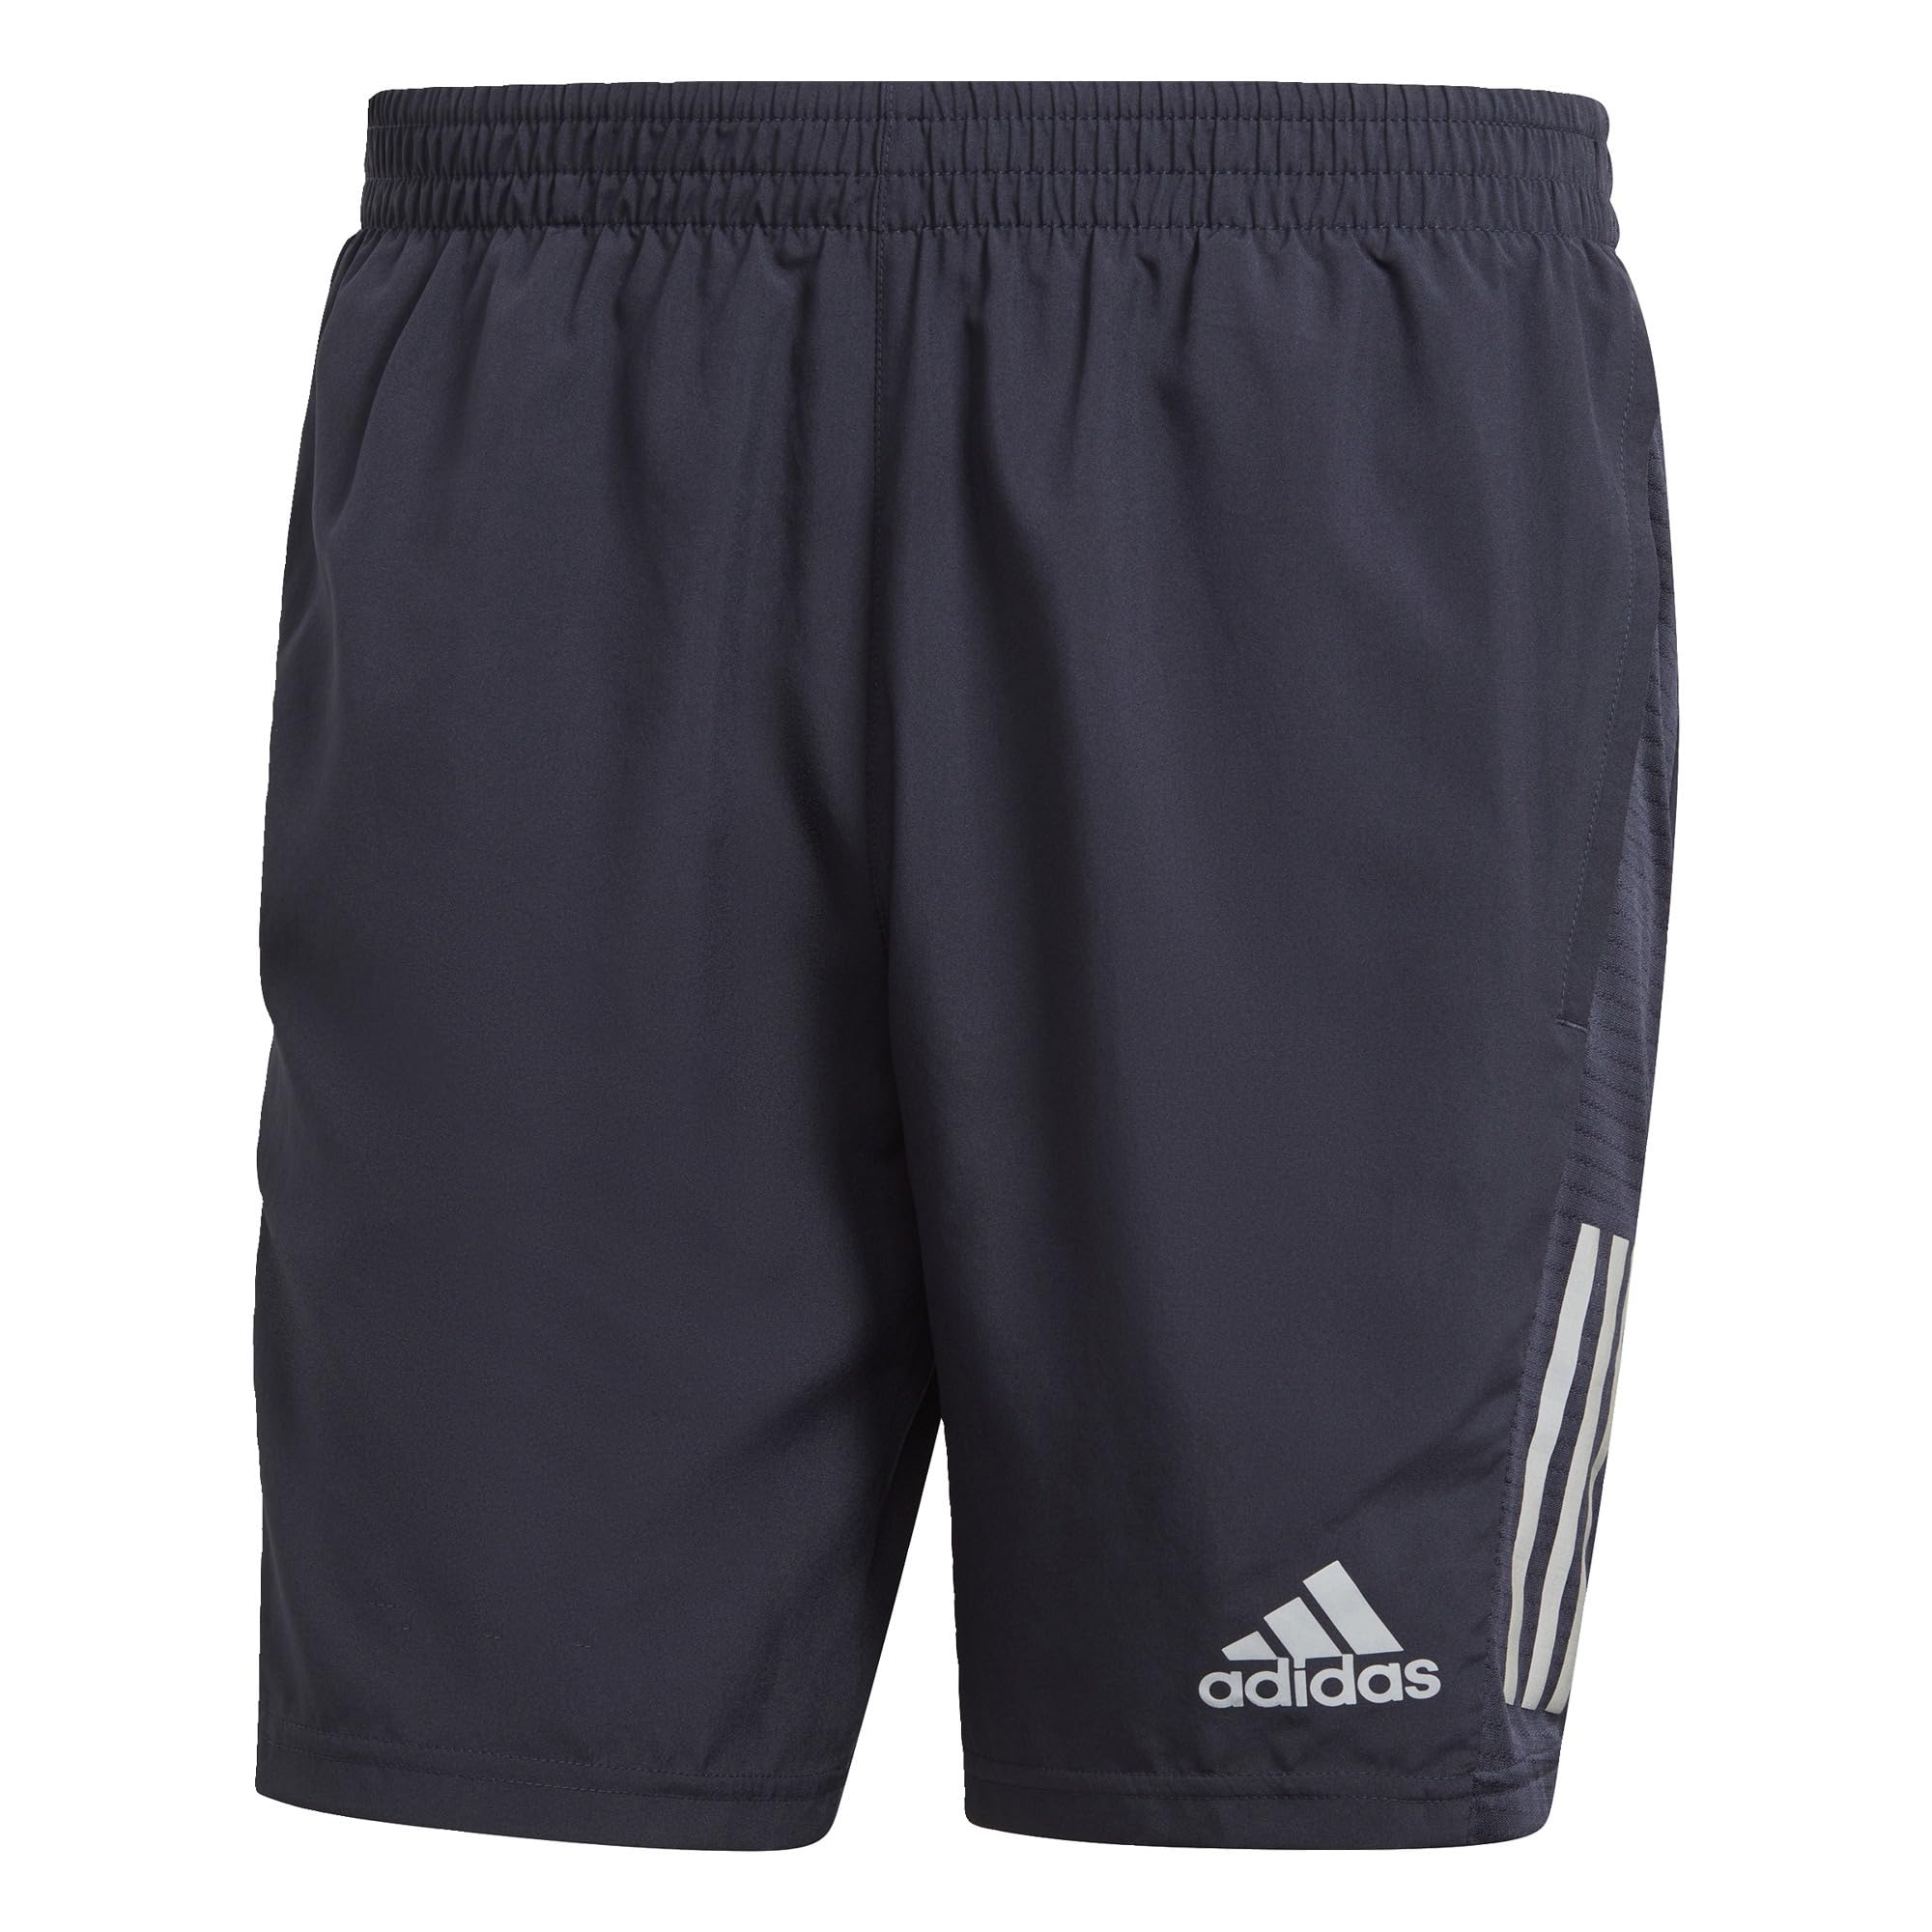 Adidas HB7455 OWN The Run SHO Shorts Men's Legend Ink/Reflective Silver M 7"